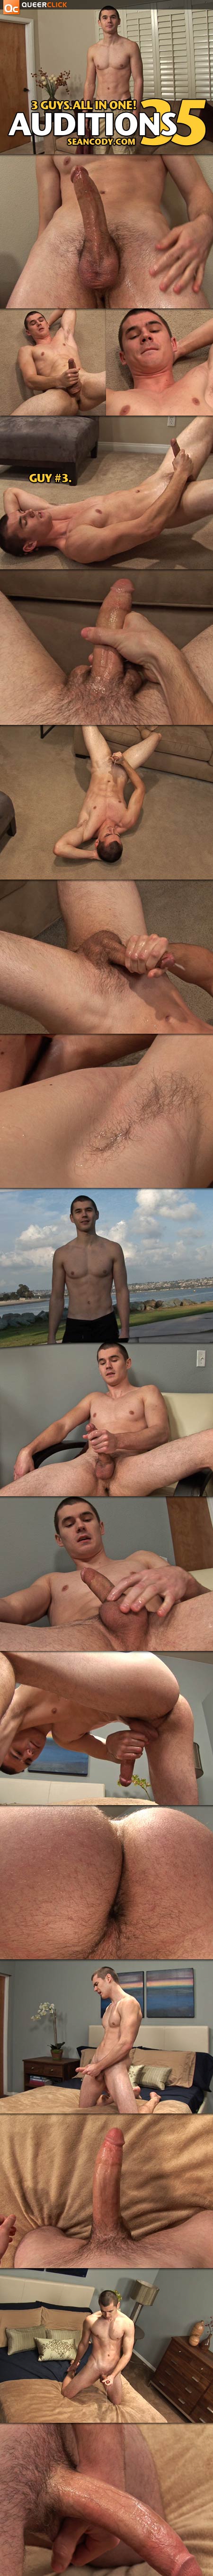 Sean Cody: Auditions 35